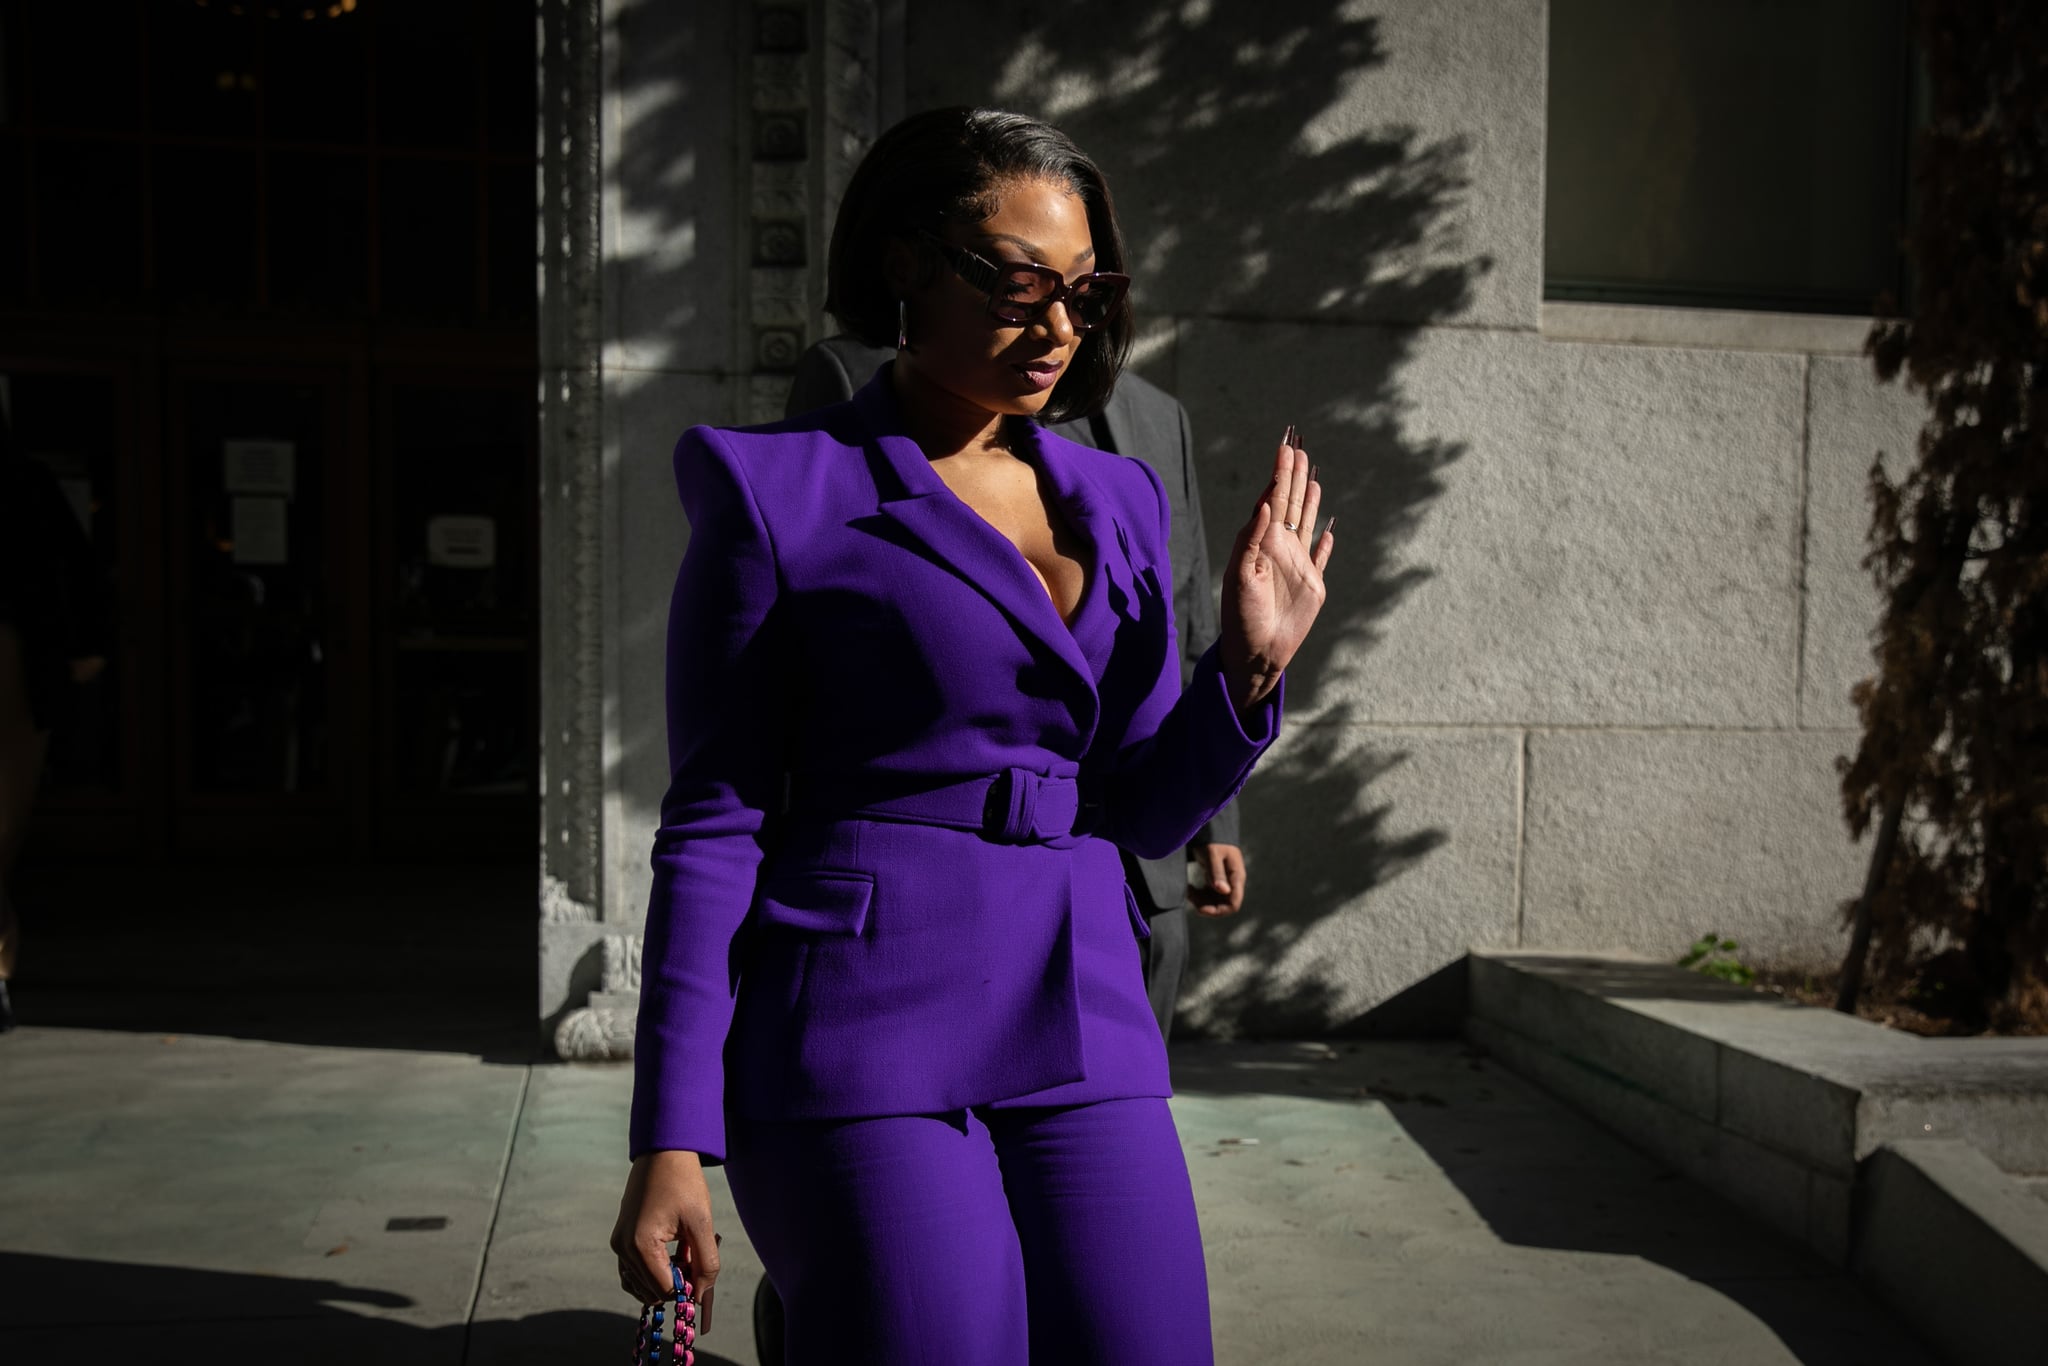 LOS ANGELES, CA - DECEMBER 13: Megan Thee Stallion whose legal name is Megan Pete makes her way from the Hall of Justice to the courthouse to testify in the trial of Rapper Tory Lanez for allegedly shooting her on Tuesday, Dec. 13, 2022 in Los Angeles, CA. (Jason Armond / Los Angeles Times via Getty Images)